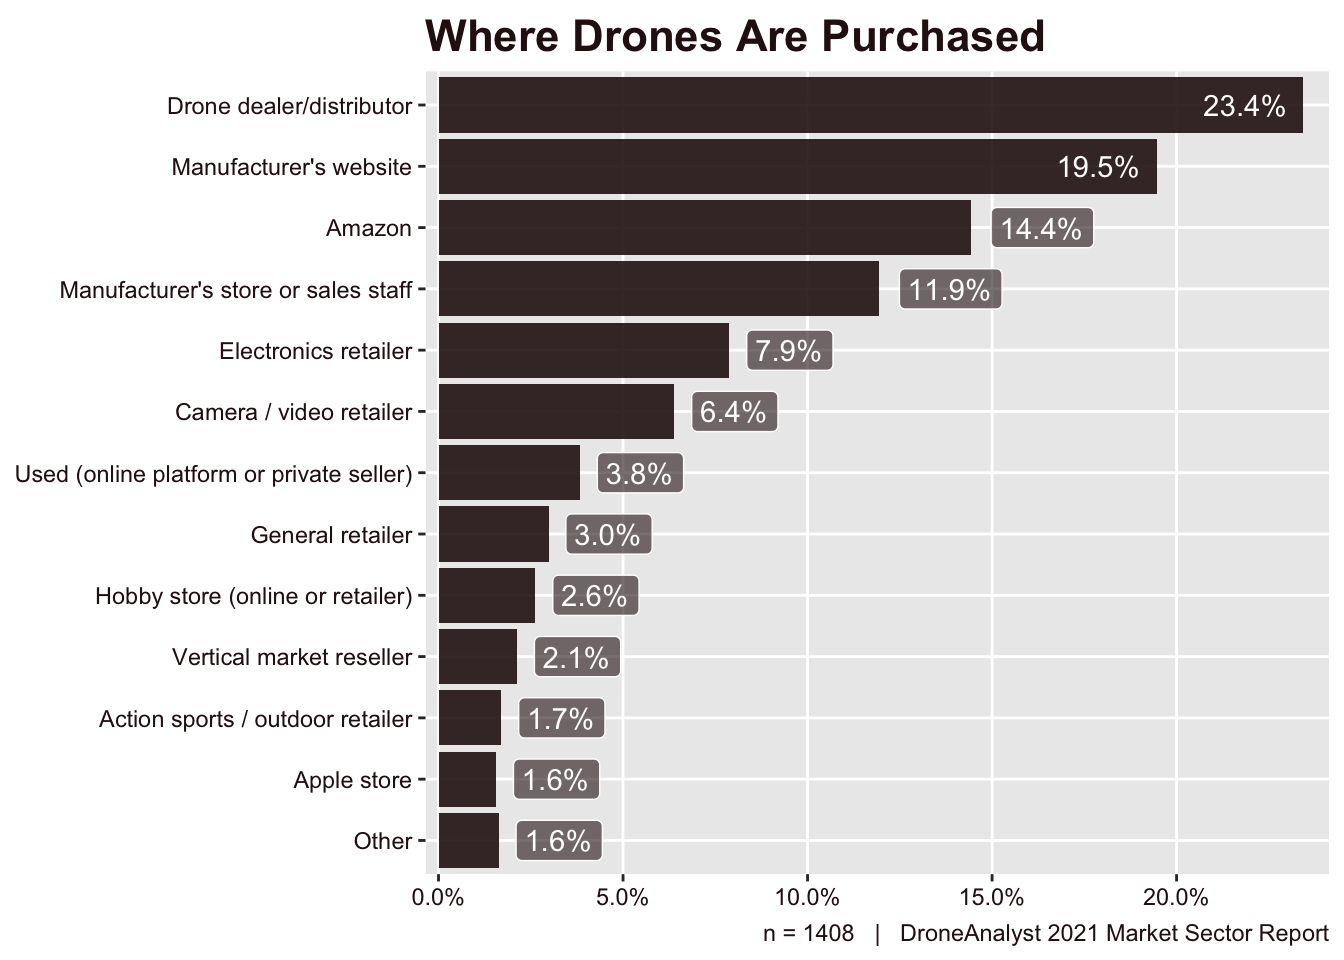 Where Drones Are Purchased